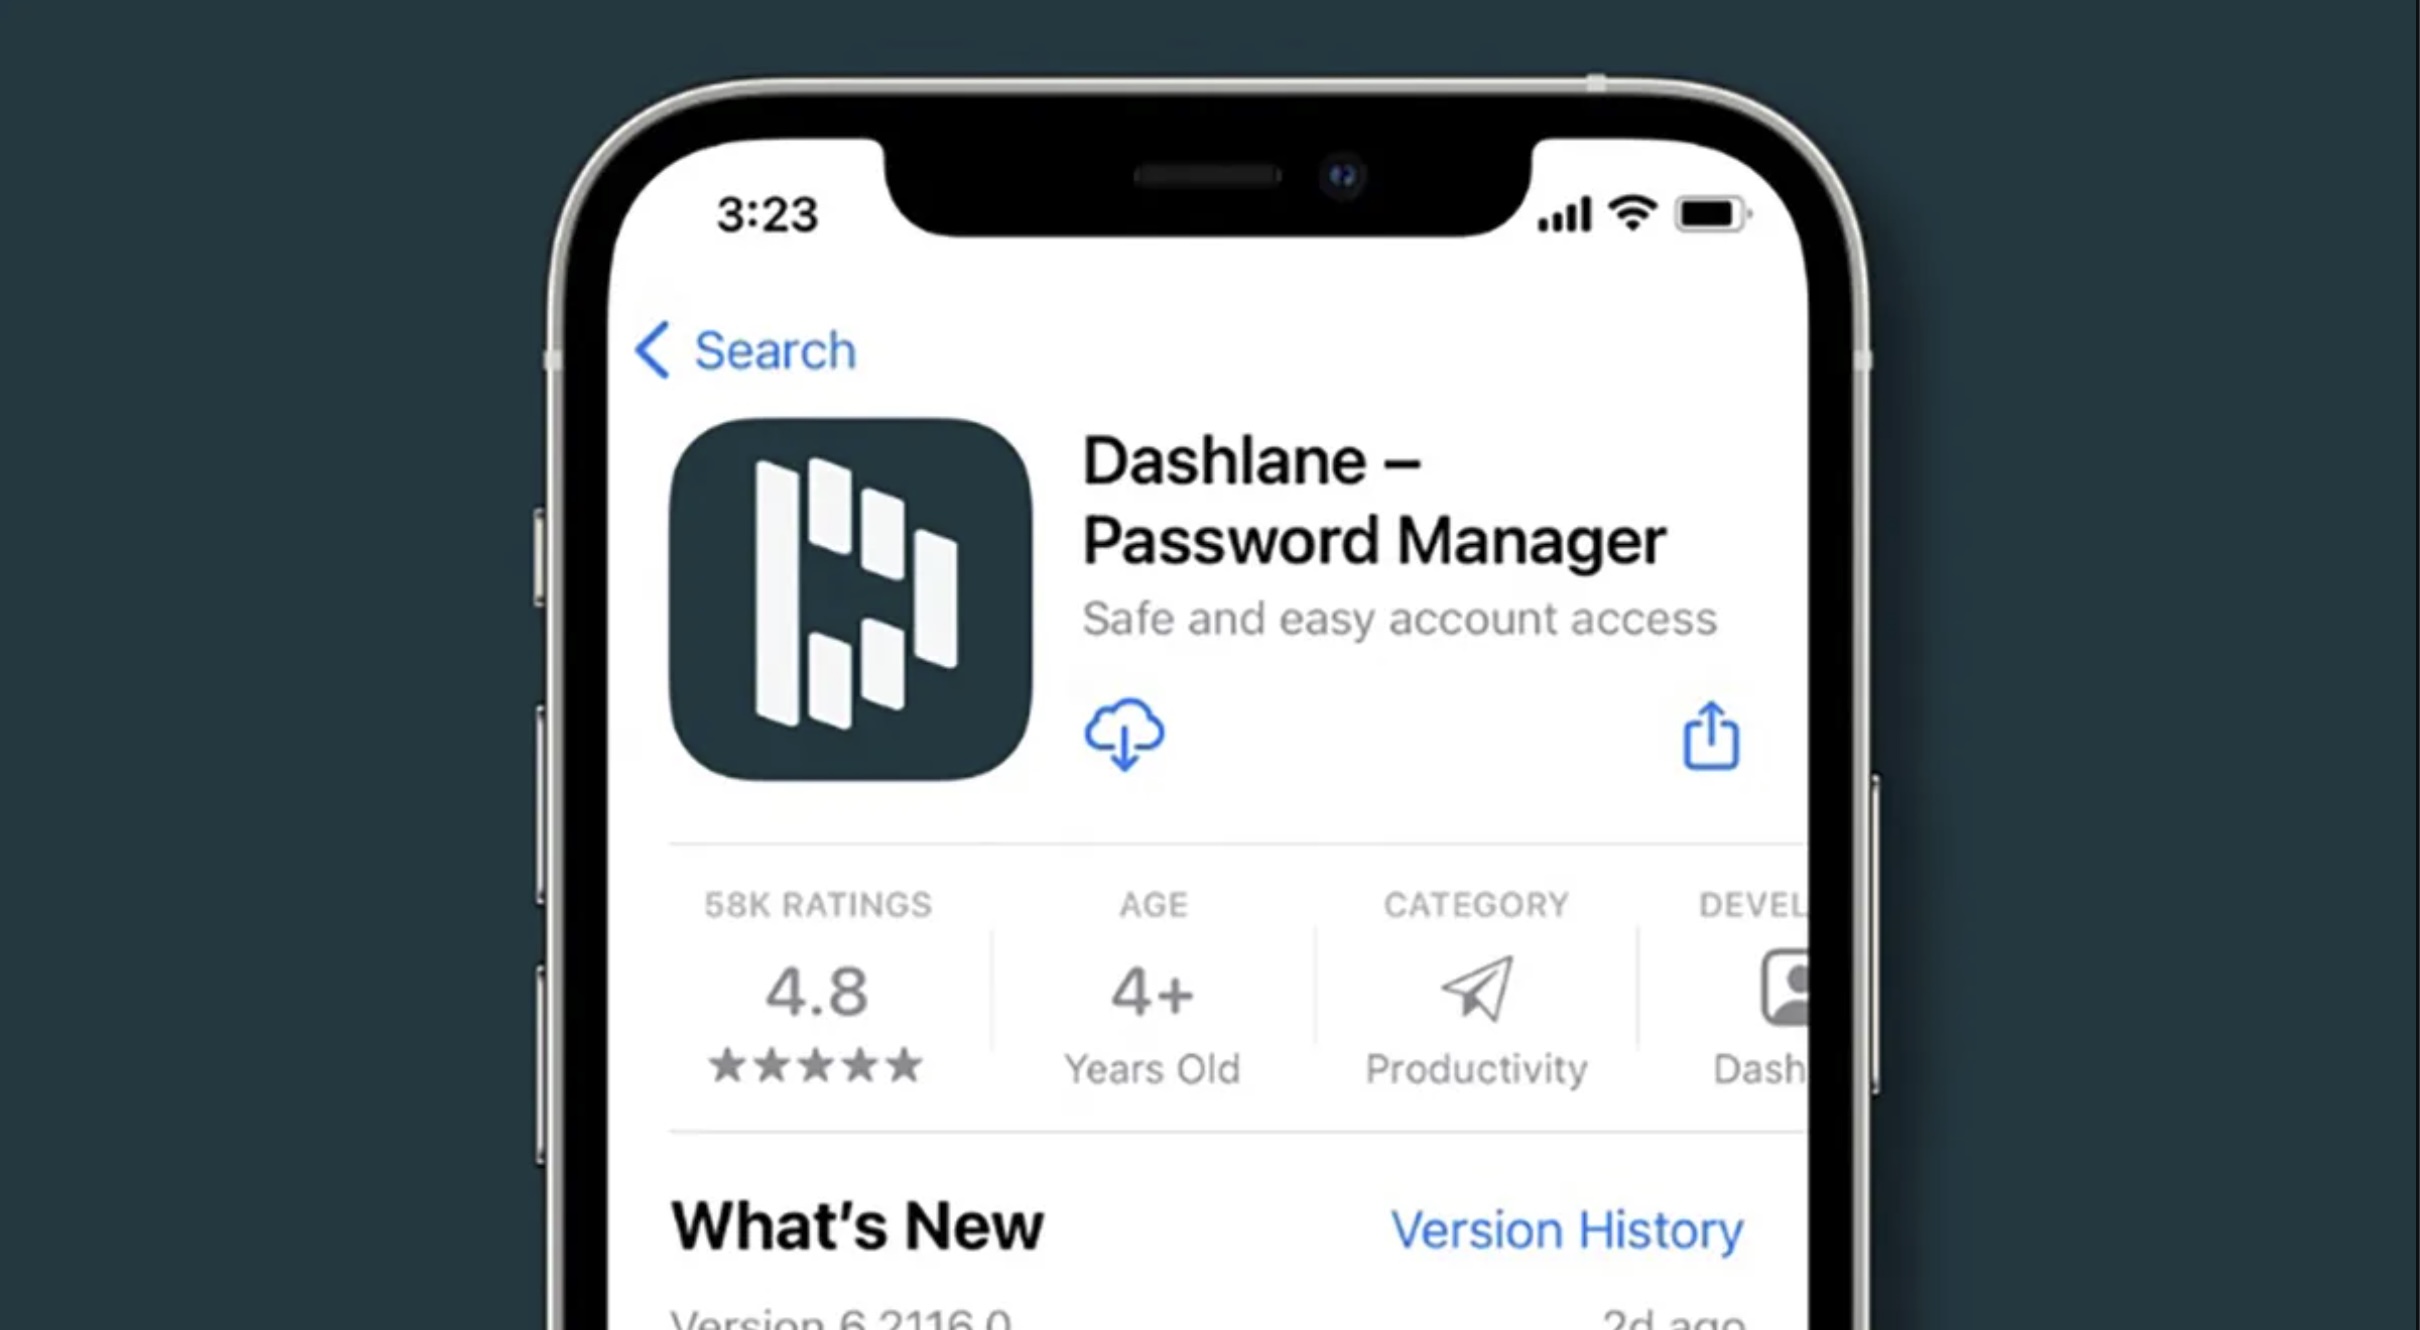 If Dashlane has its way, Passkeys could soon replace Passwords